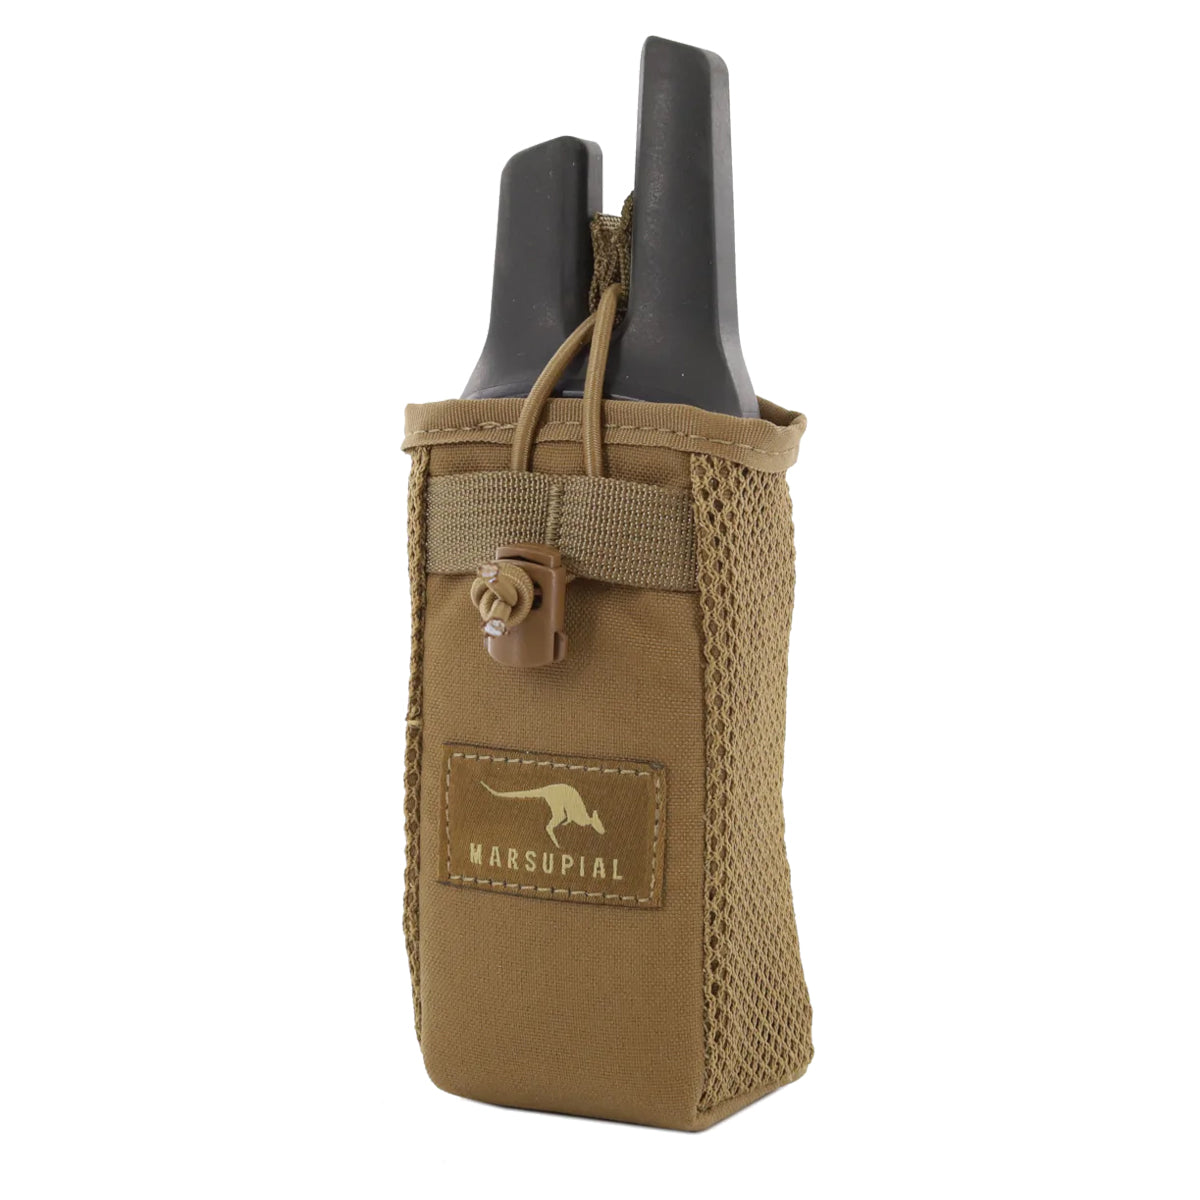 Marsupial Gear Radio Pouch in Coyote by GOHUNT | Marsupial Gear - GOHUNT Shop